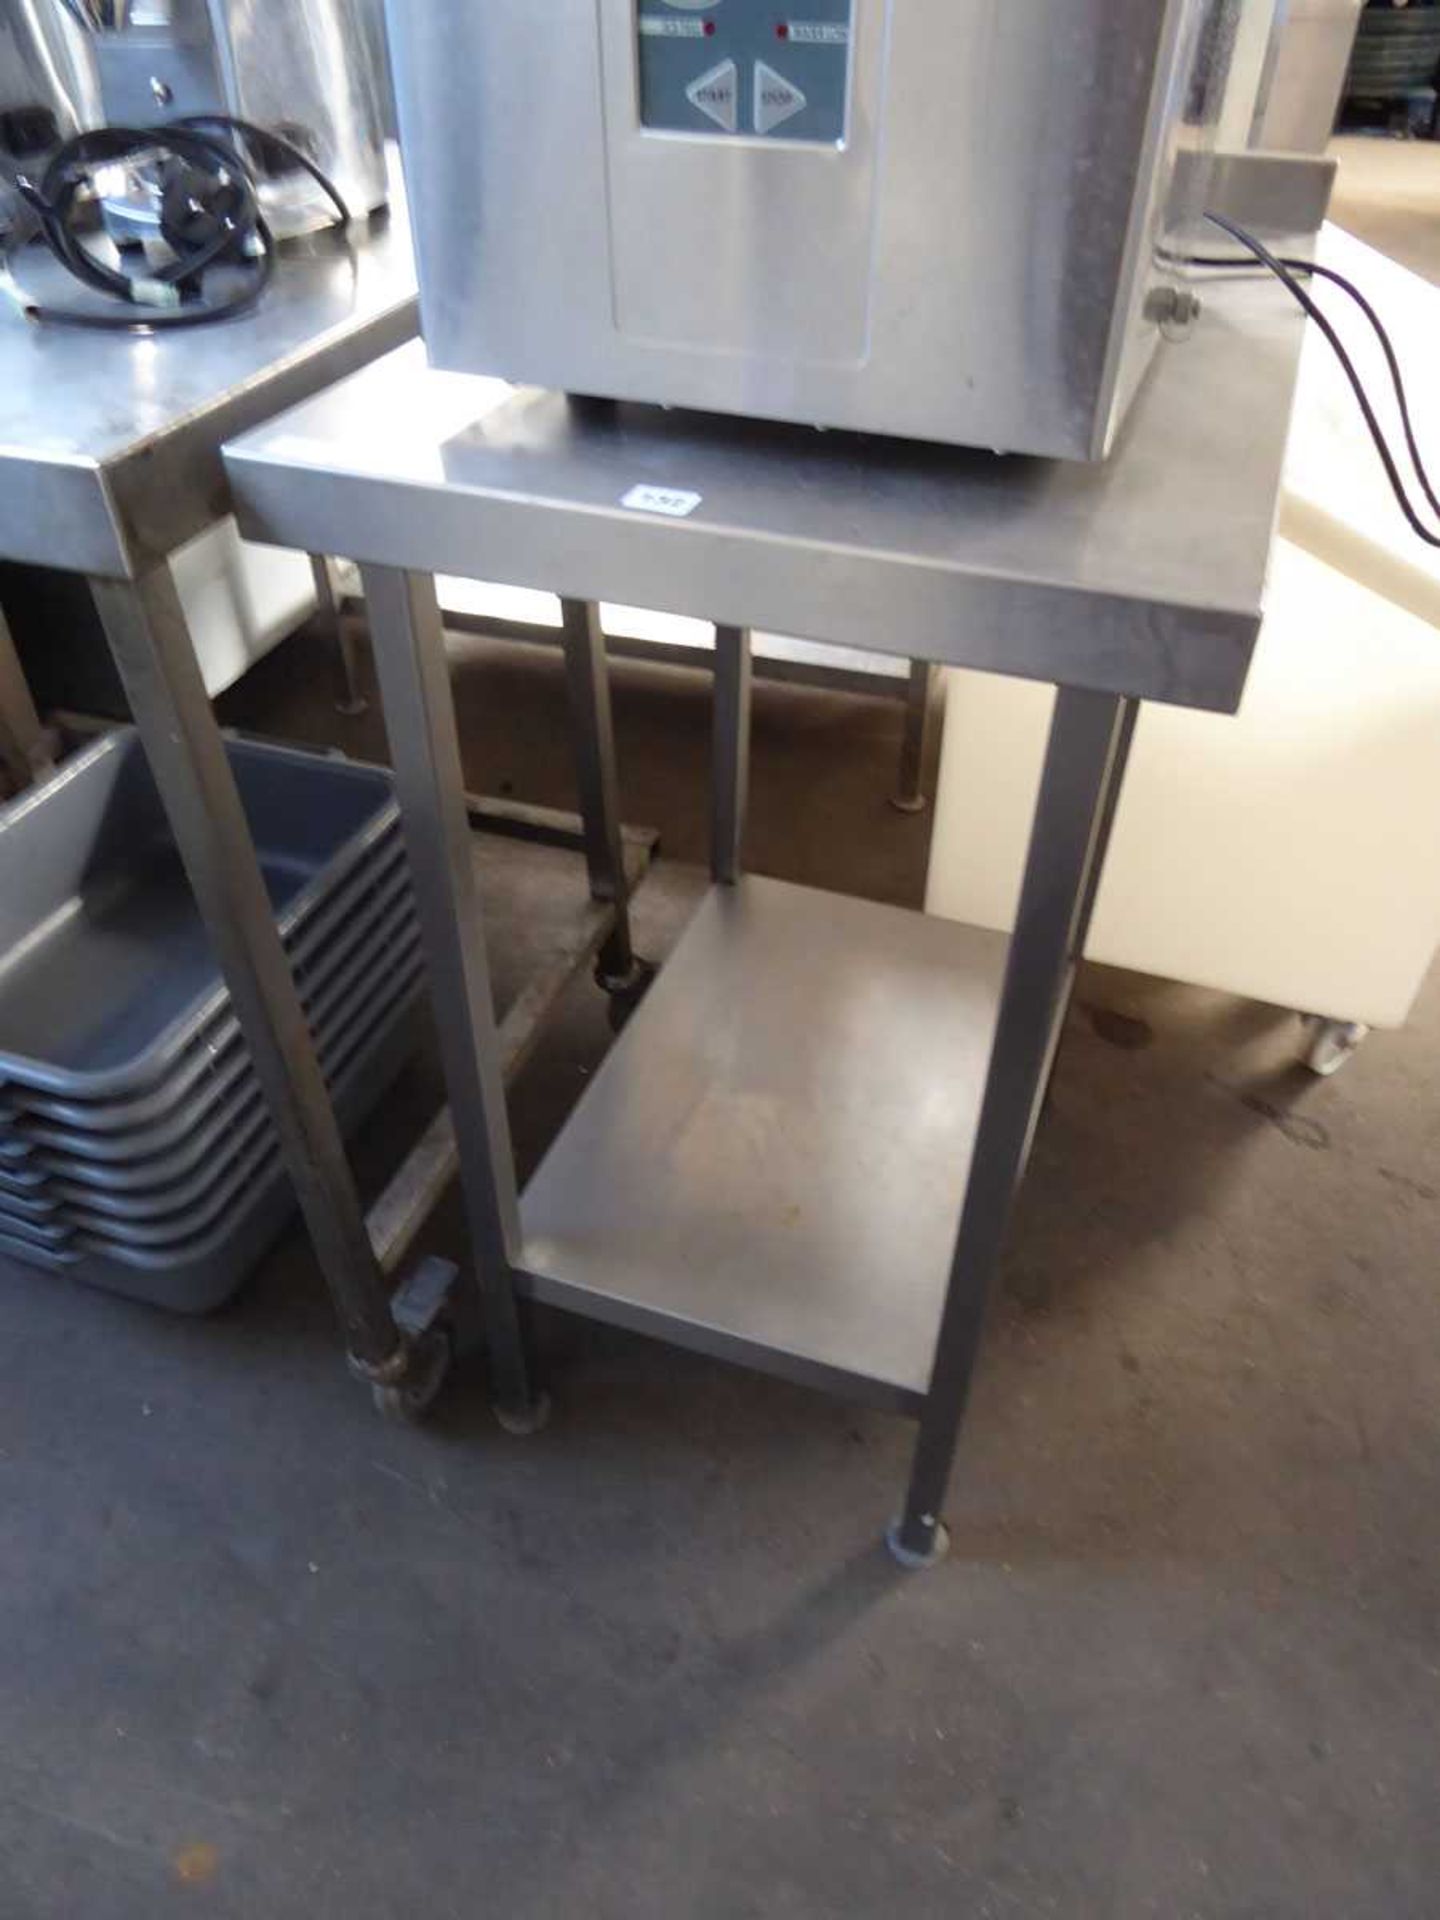 50cm stainless steel preparation table with shelf under - Image 3 of 3